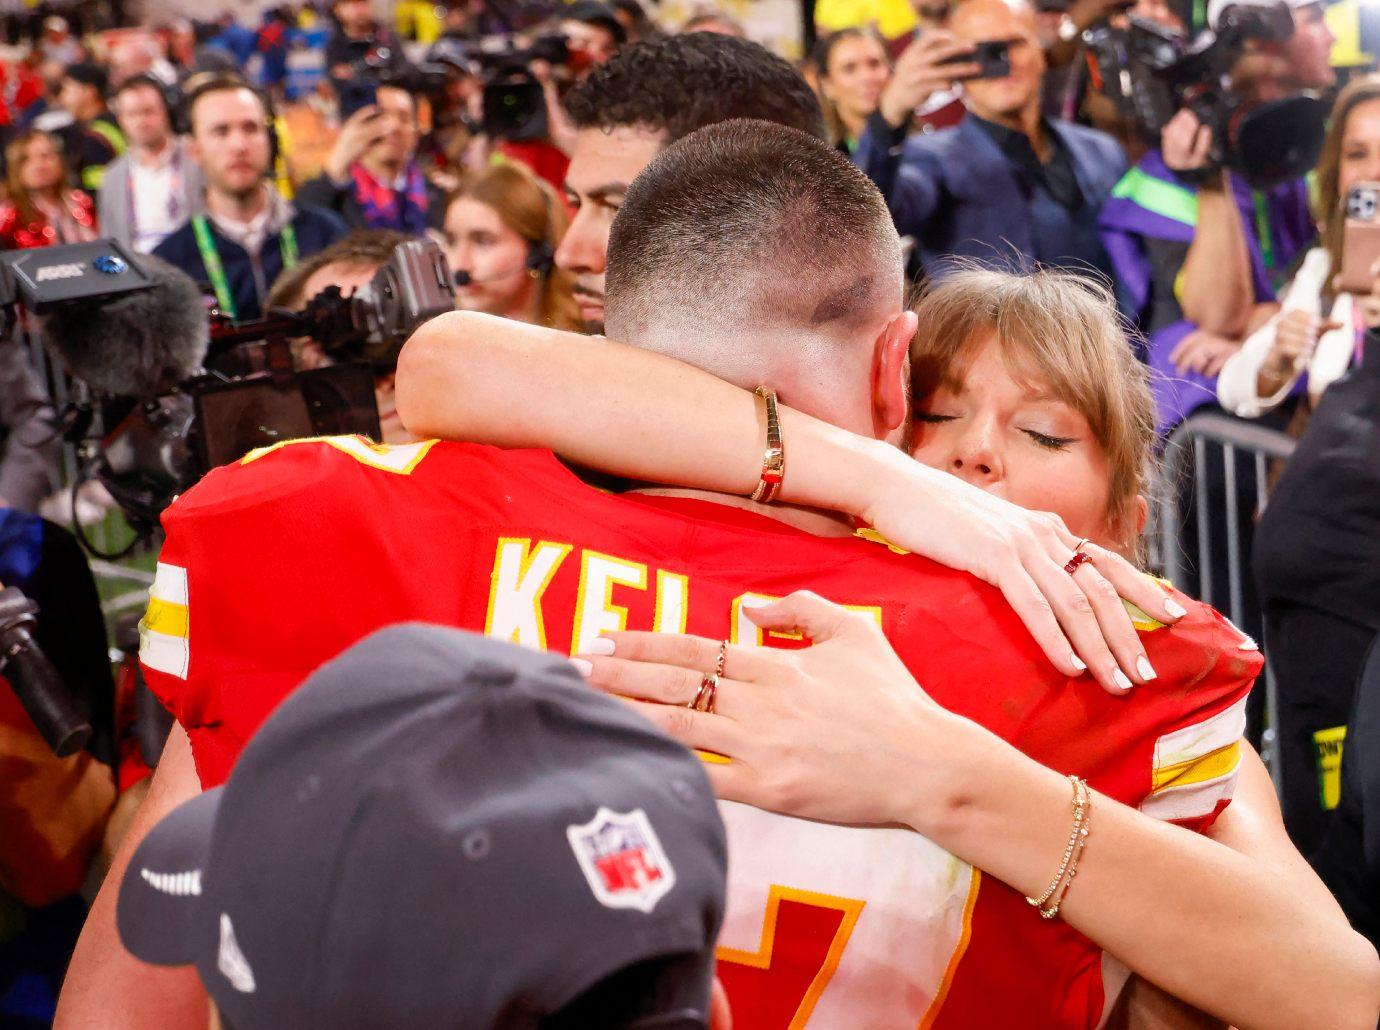 News Update: Taylor Swift, the super pop star, says she and her lover boy Travis Kelce, the Kansas City Chiefs, are "proud of each other" and "don't care" about the criticism, jealousy and hatred they've received for their public romance...